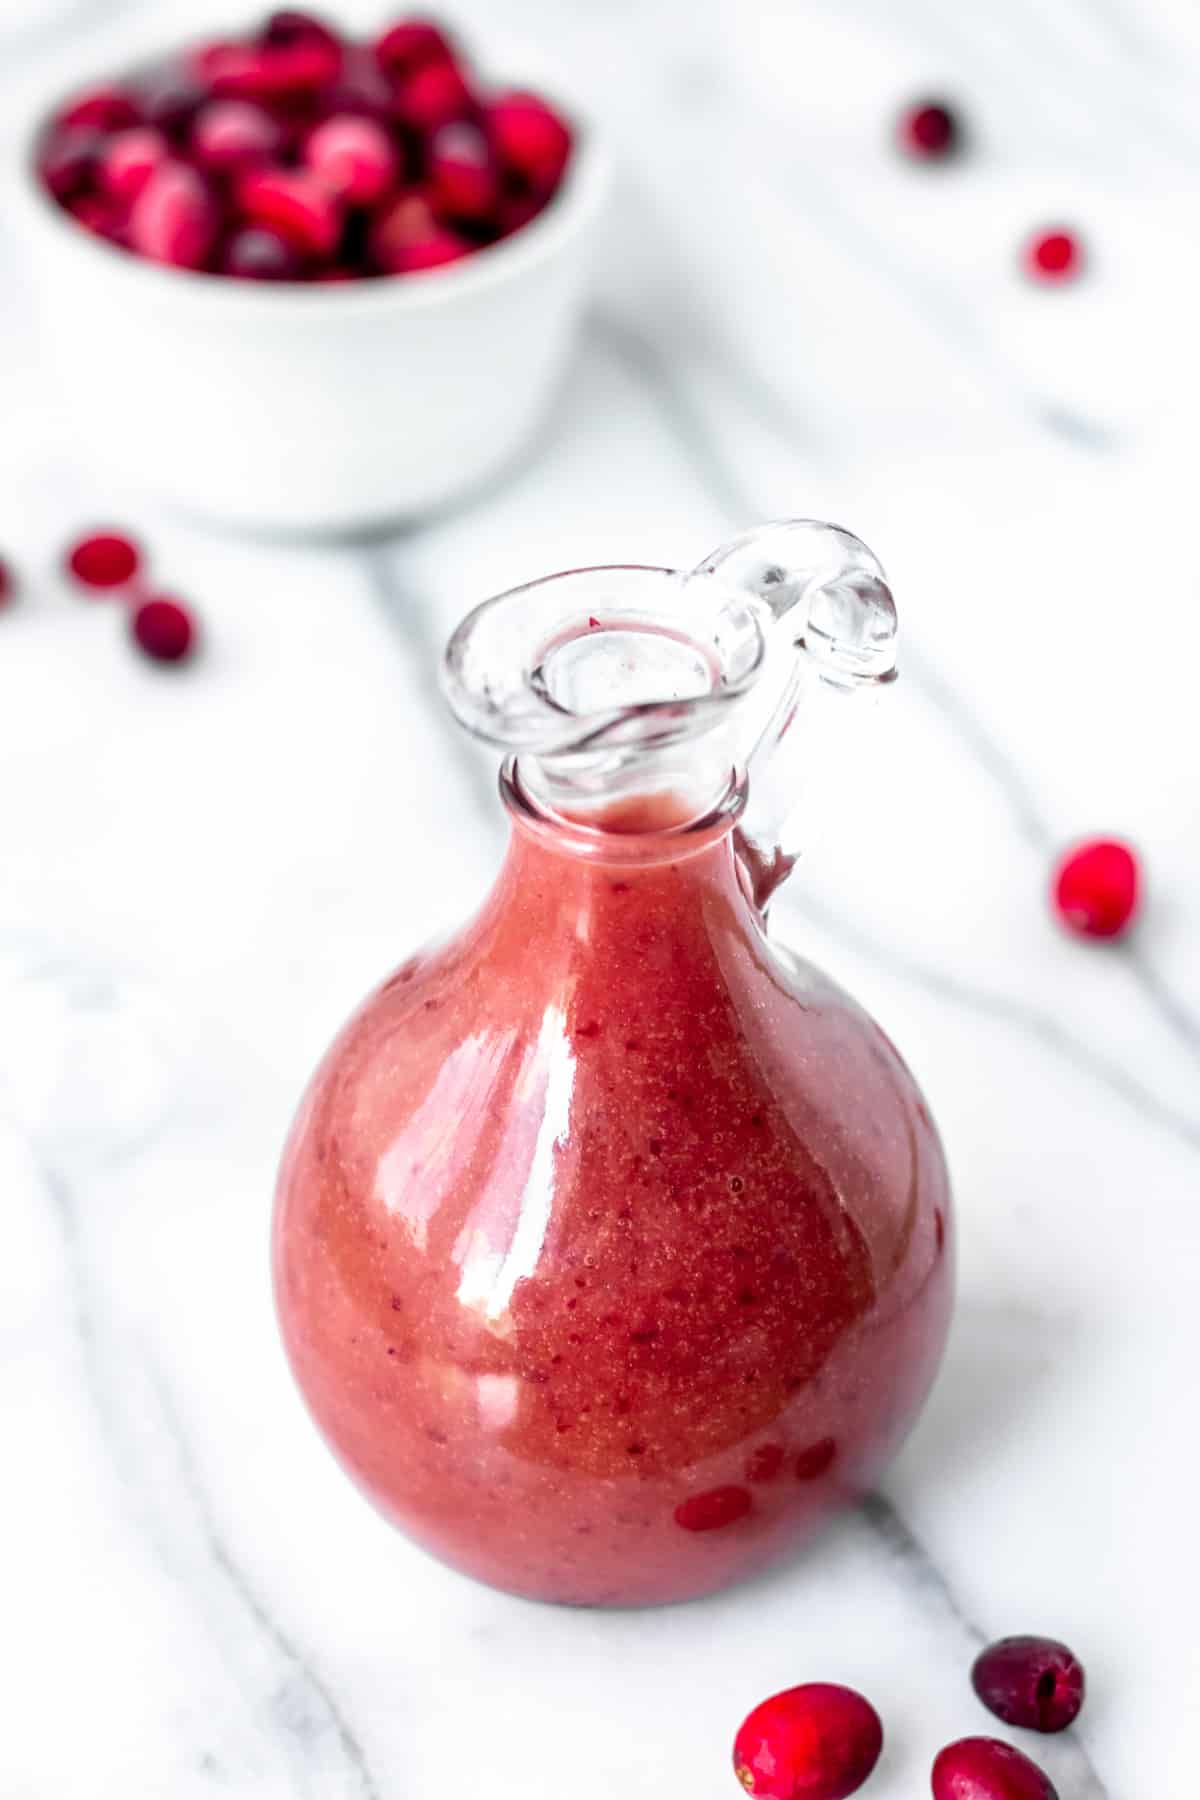 Cranberry salad dressing in a carafe with a bowl of cranberries and loose cranberries around it.